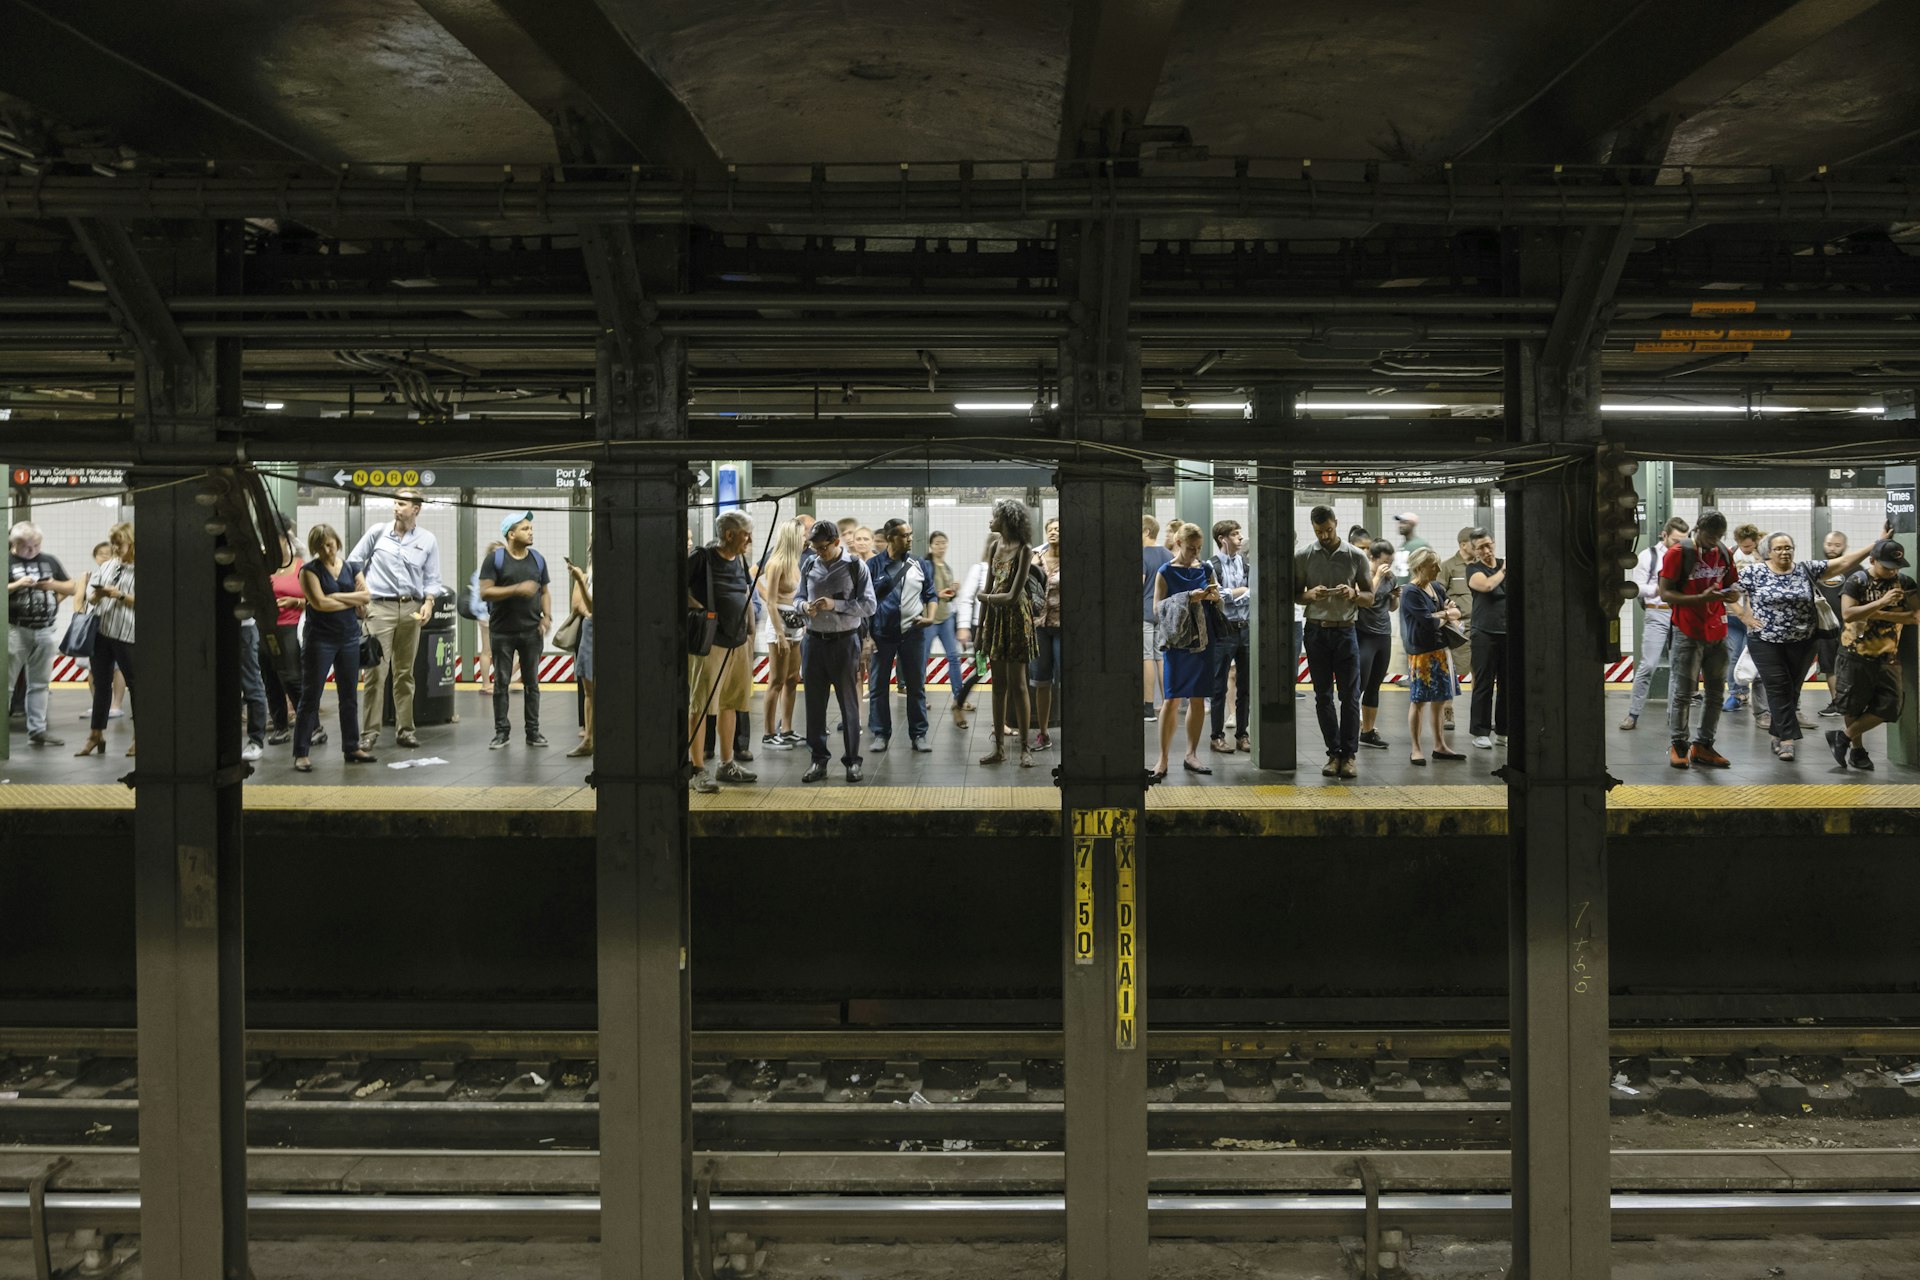 Passengers wait for a train at Times Square subway station in New York City